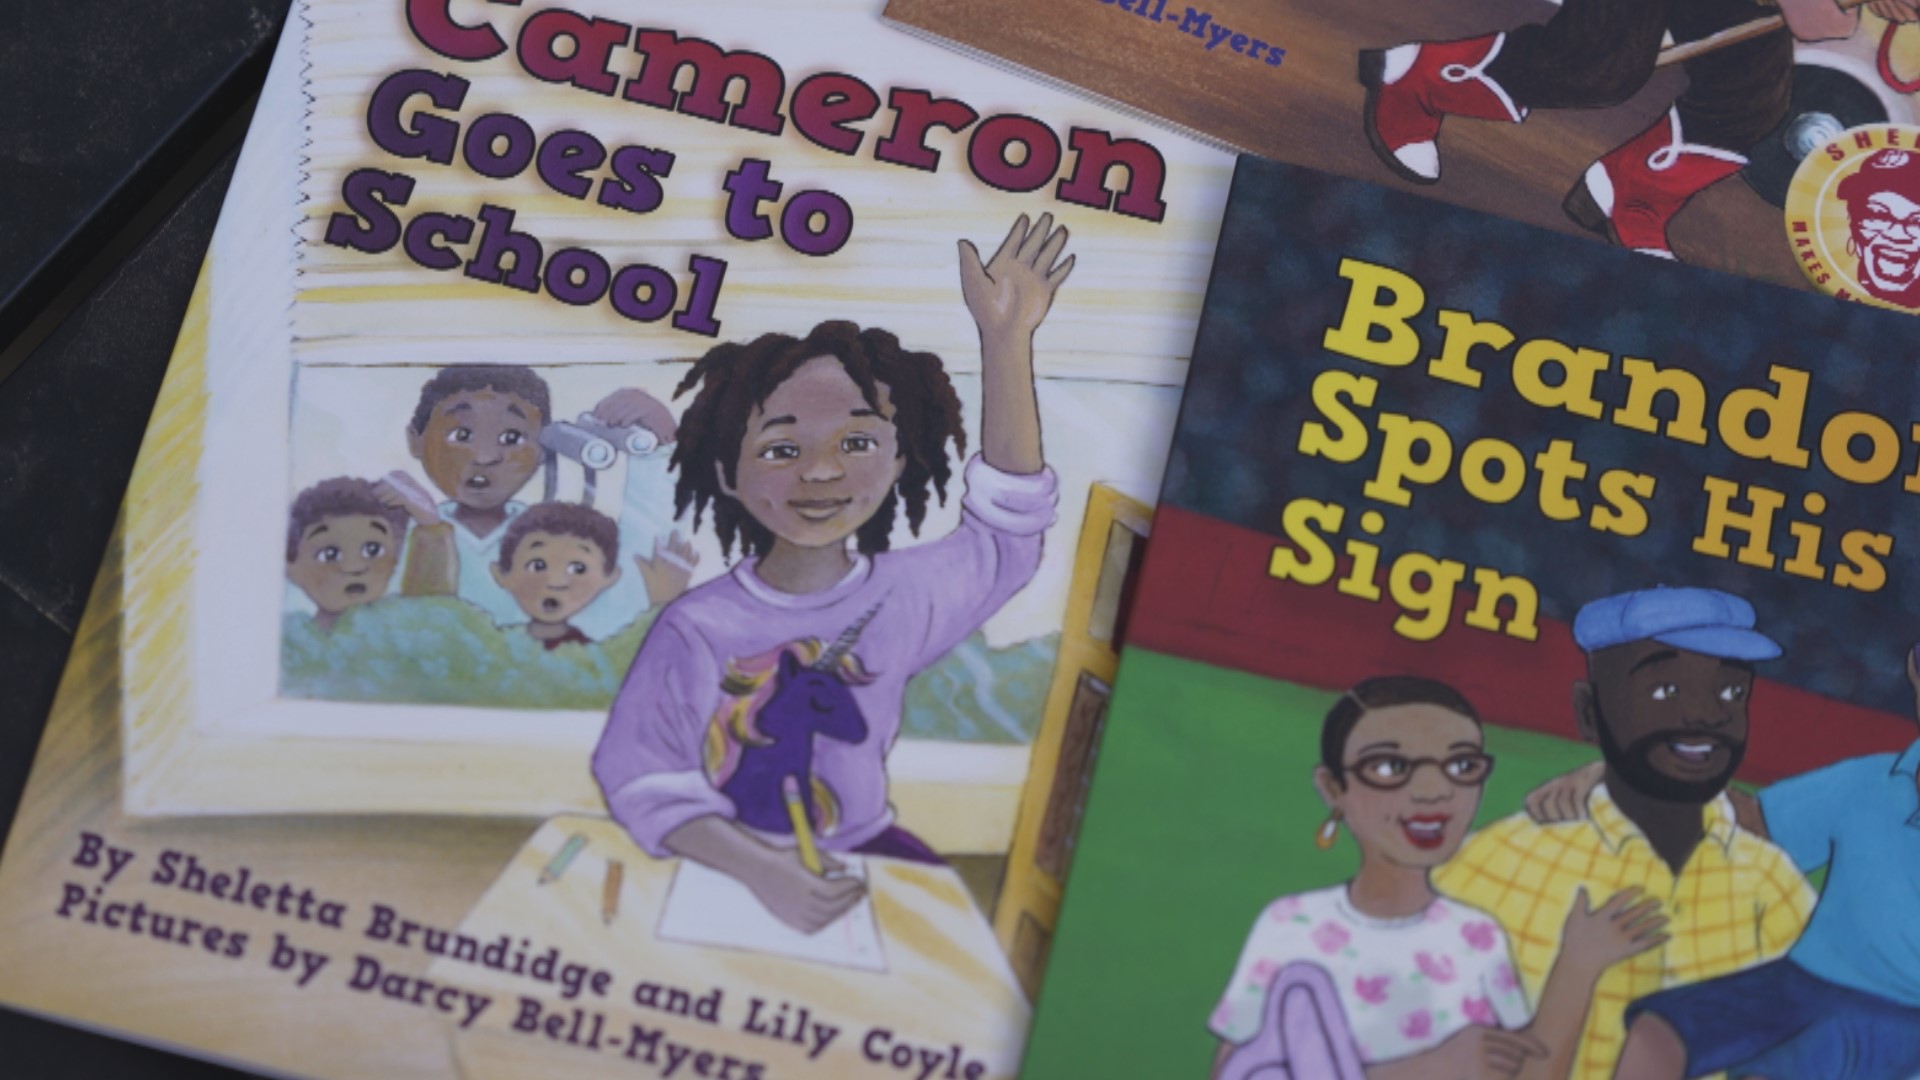 Sheletta Brundidge and other Black female children's book authors from Minnesota are helping kids in Buffalo after this month's racist mass shooting.